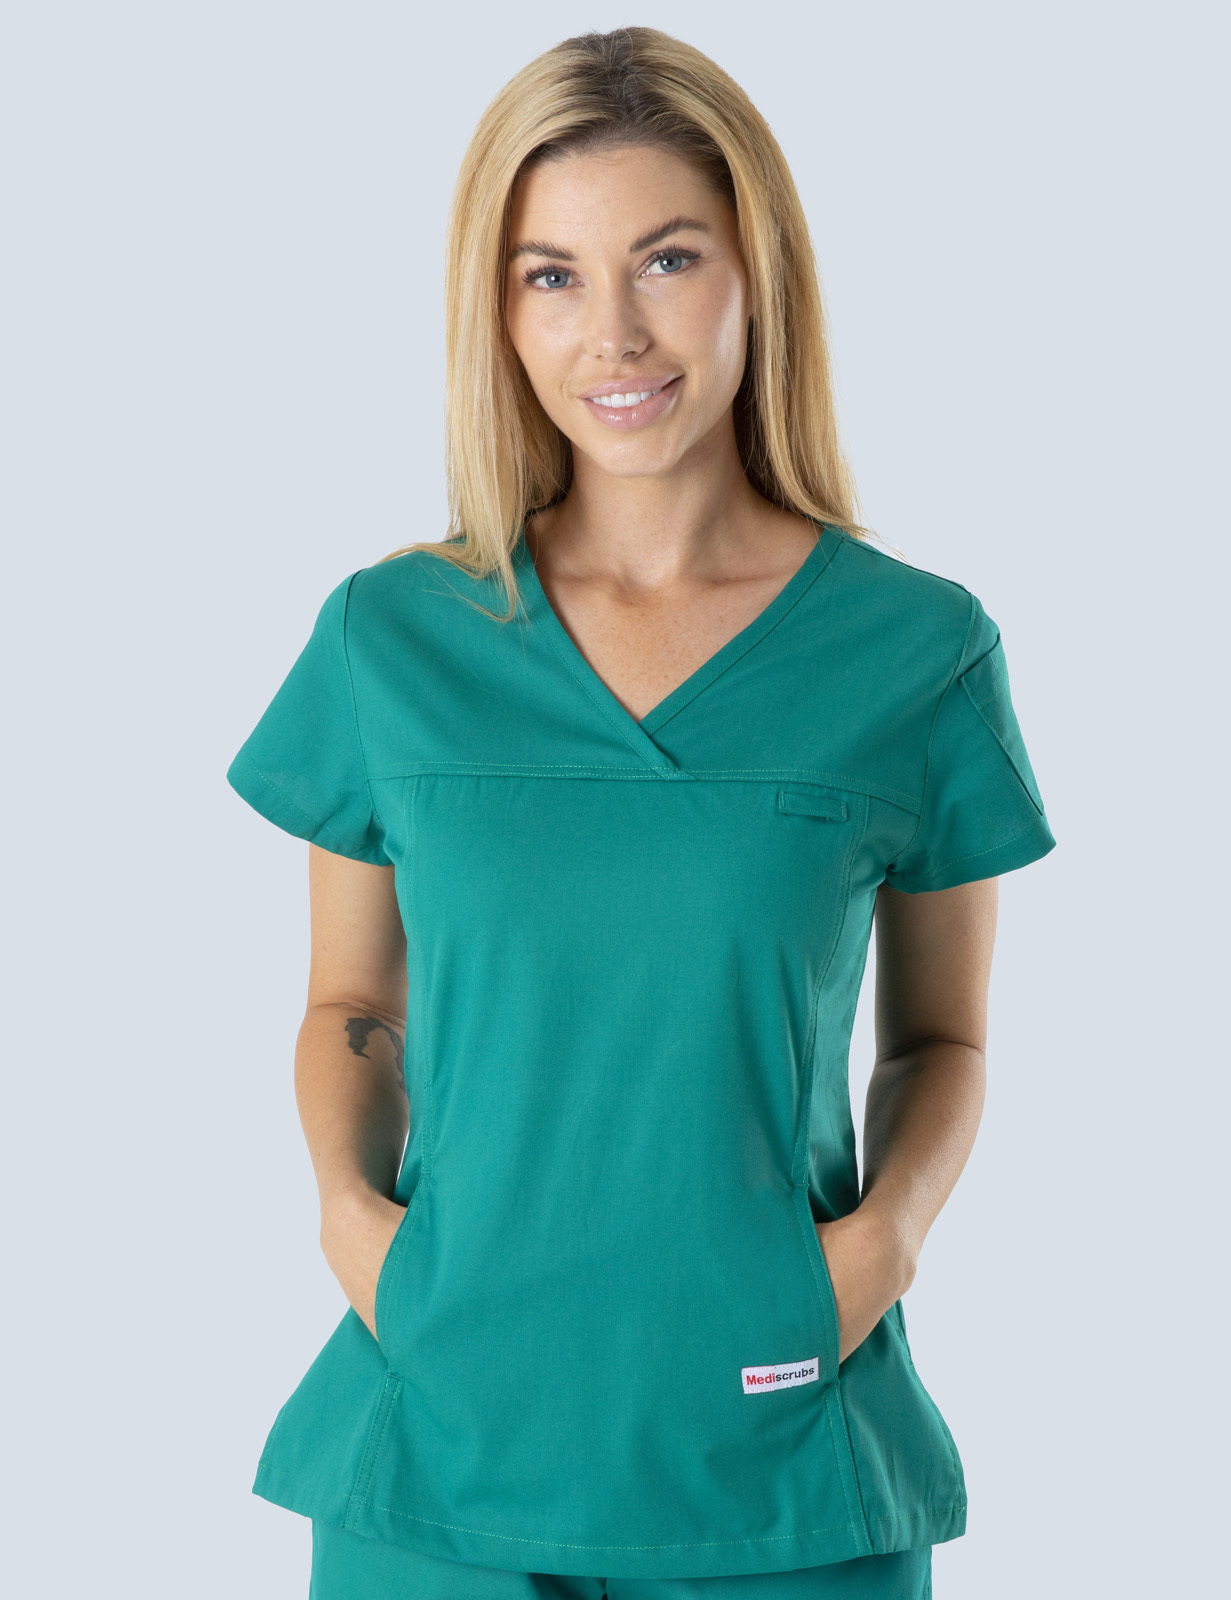 Ipswich Hospital Emergency Department Assistant In Nursing Uniform Set Bundle (Wome'ns Fit Solid Top and Cargo Pants in Hunter + 3 Logo)